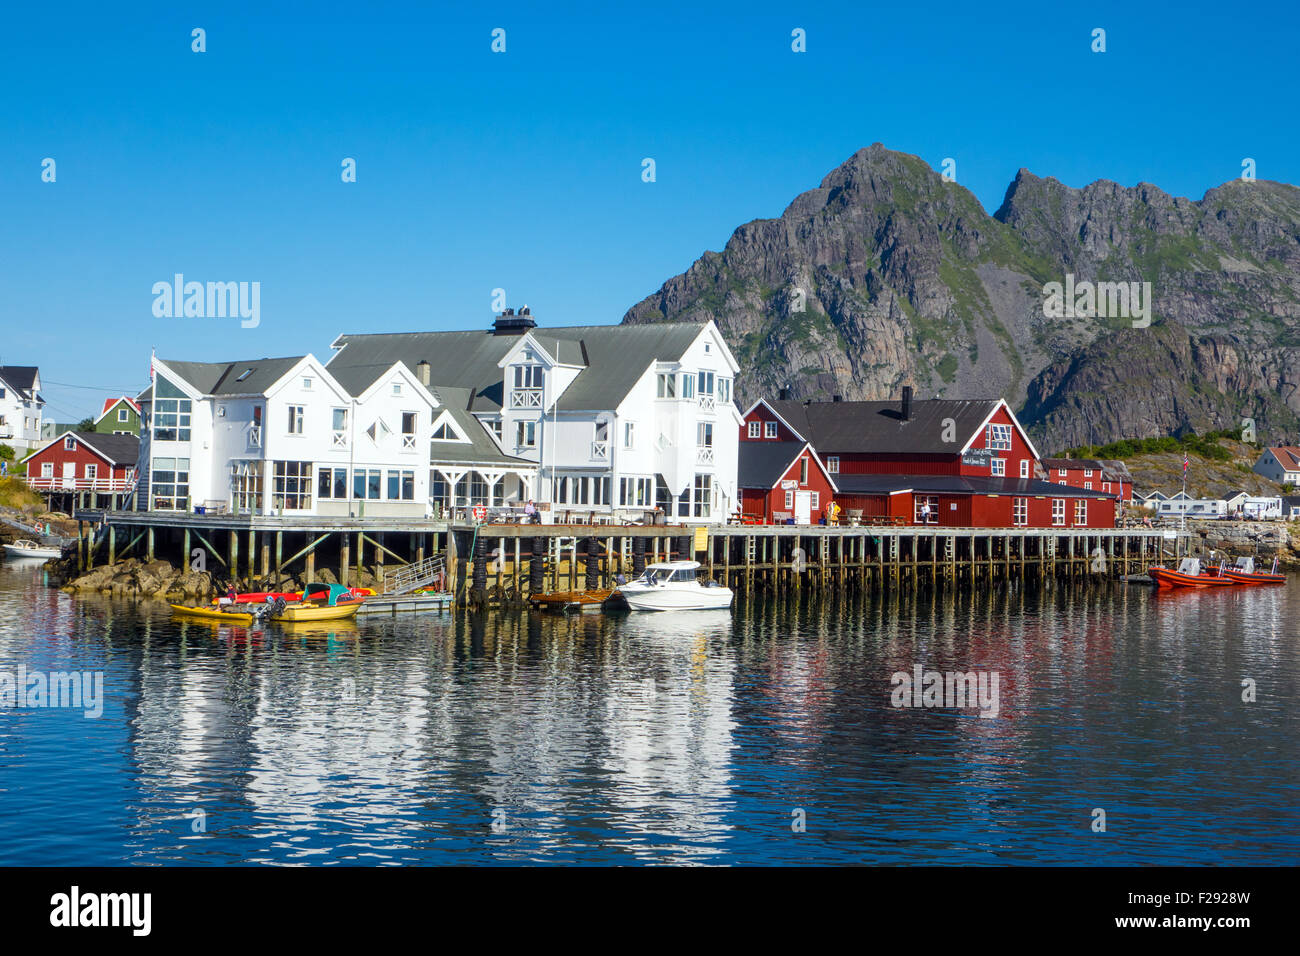 Red and white waterside fishing houses, Rorbu, on wooden stilts, with reflections Stock Photo